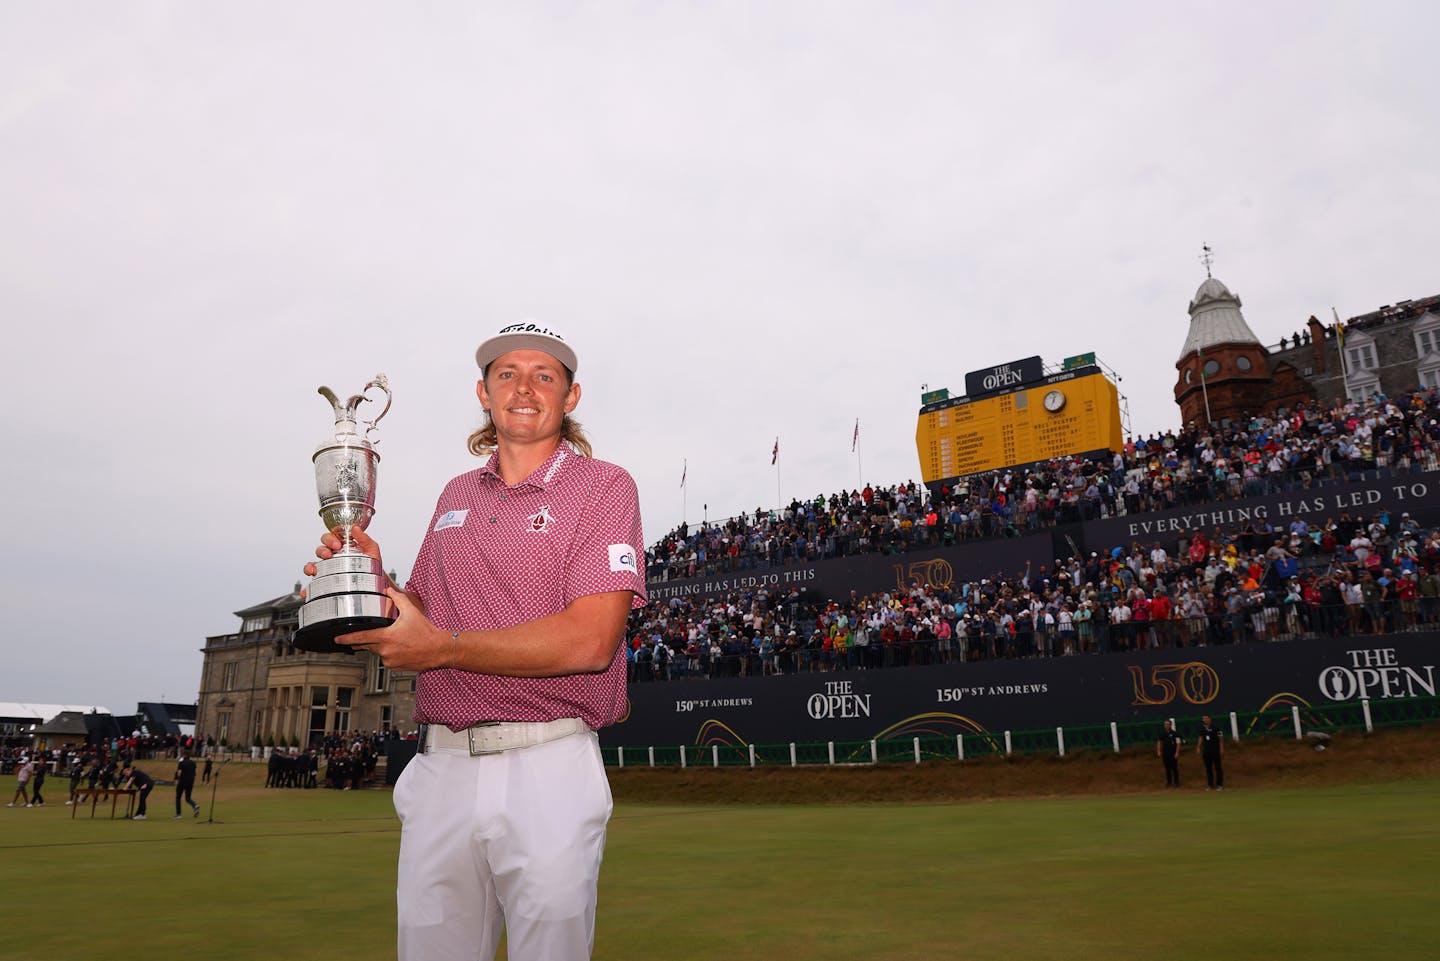 ST ANDREWS, SCOTLAND - JULY 17: Cameron Smith of Australia poses with The Claret Jug in front of the 18th hole grandstand during Day Four of The 150th Open at St Andrews Old Course on July 17, 2022 in St Andrews, Scotland. (Photo by Richard Heathcote/R&amp;A/R&amp;A via Getty Images)